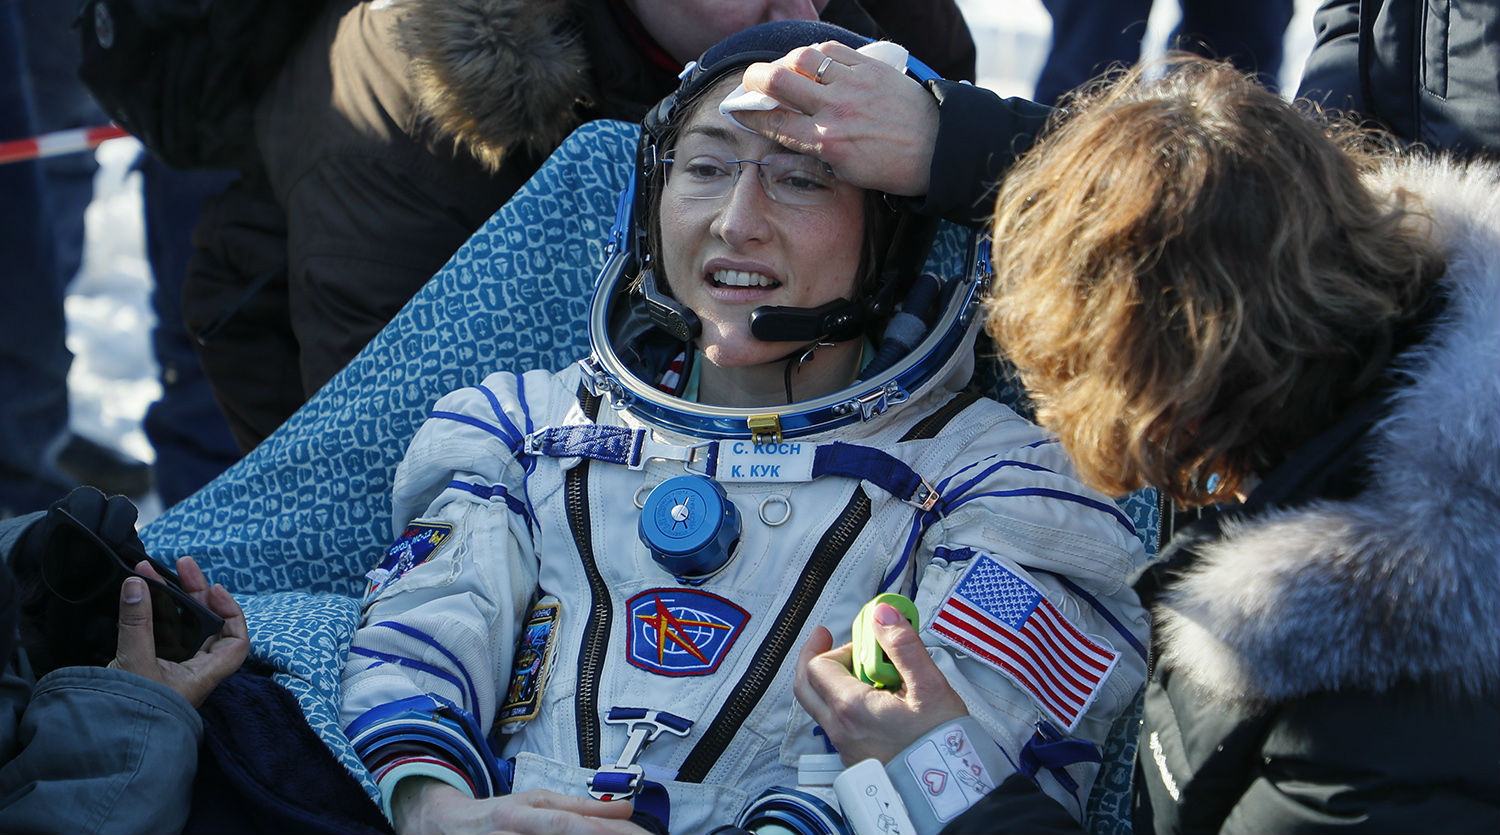 Nasas Female Astronaut Christina Koch Lands Back On Earth After Record Breaking 328 Days In